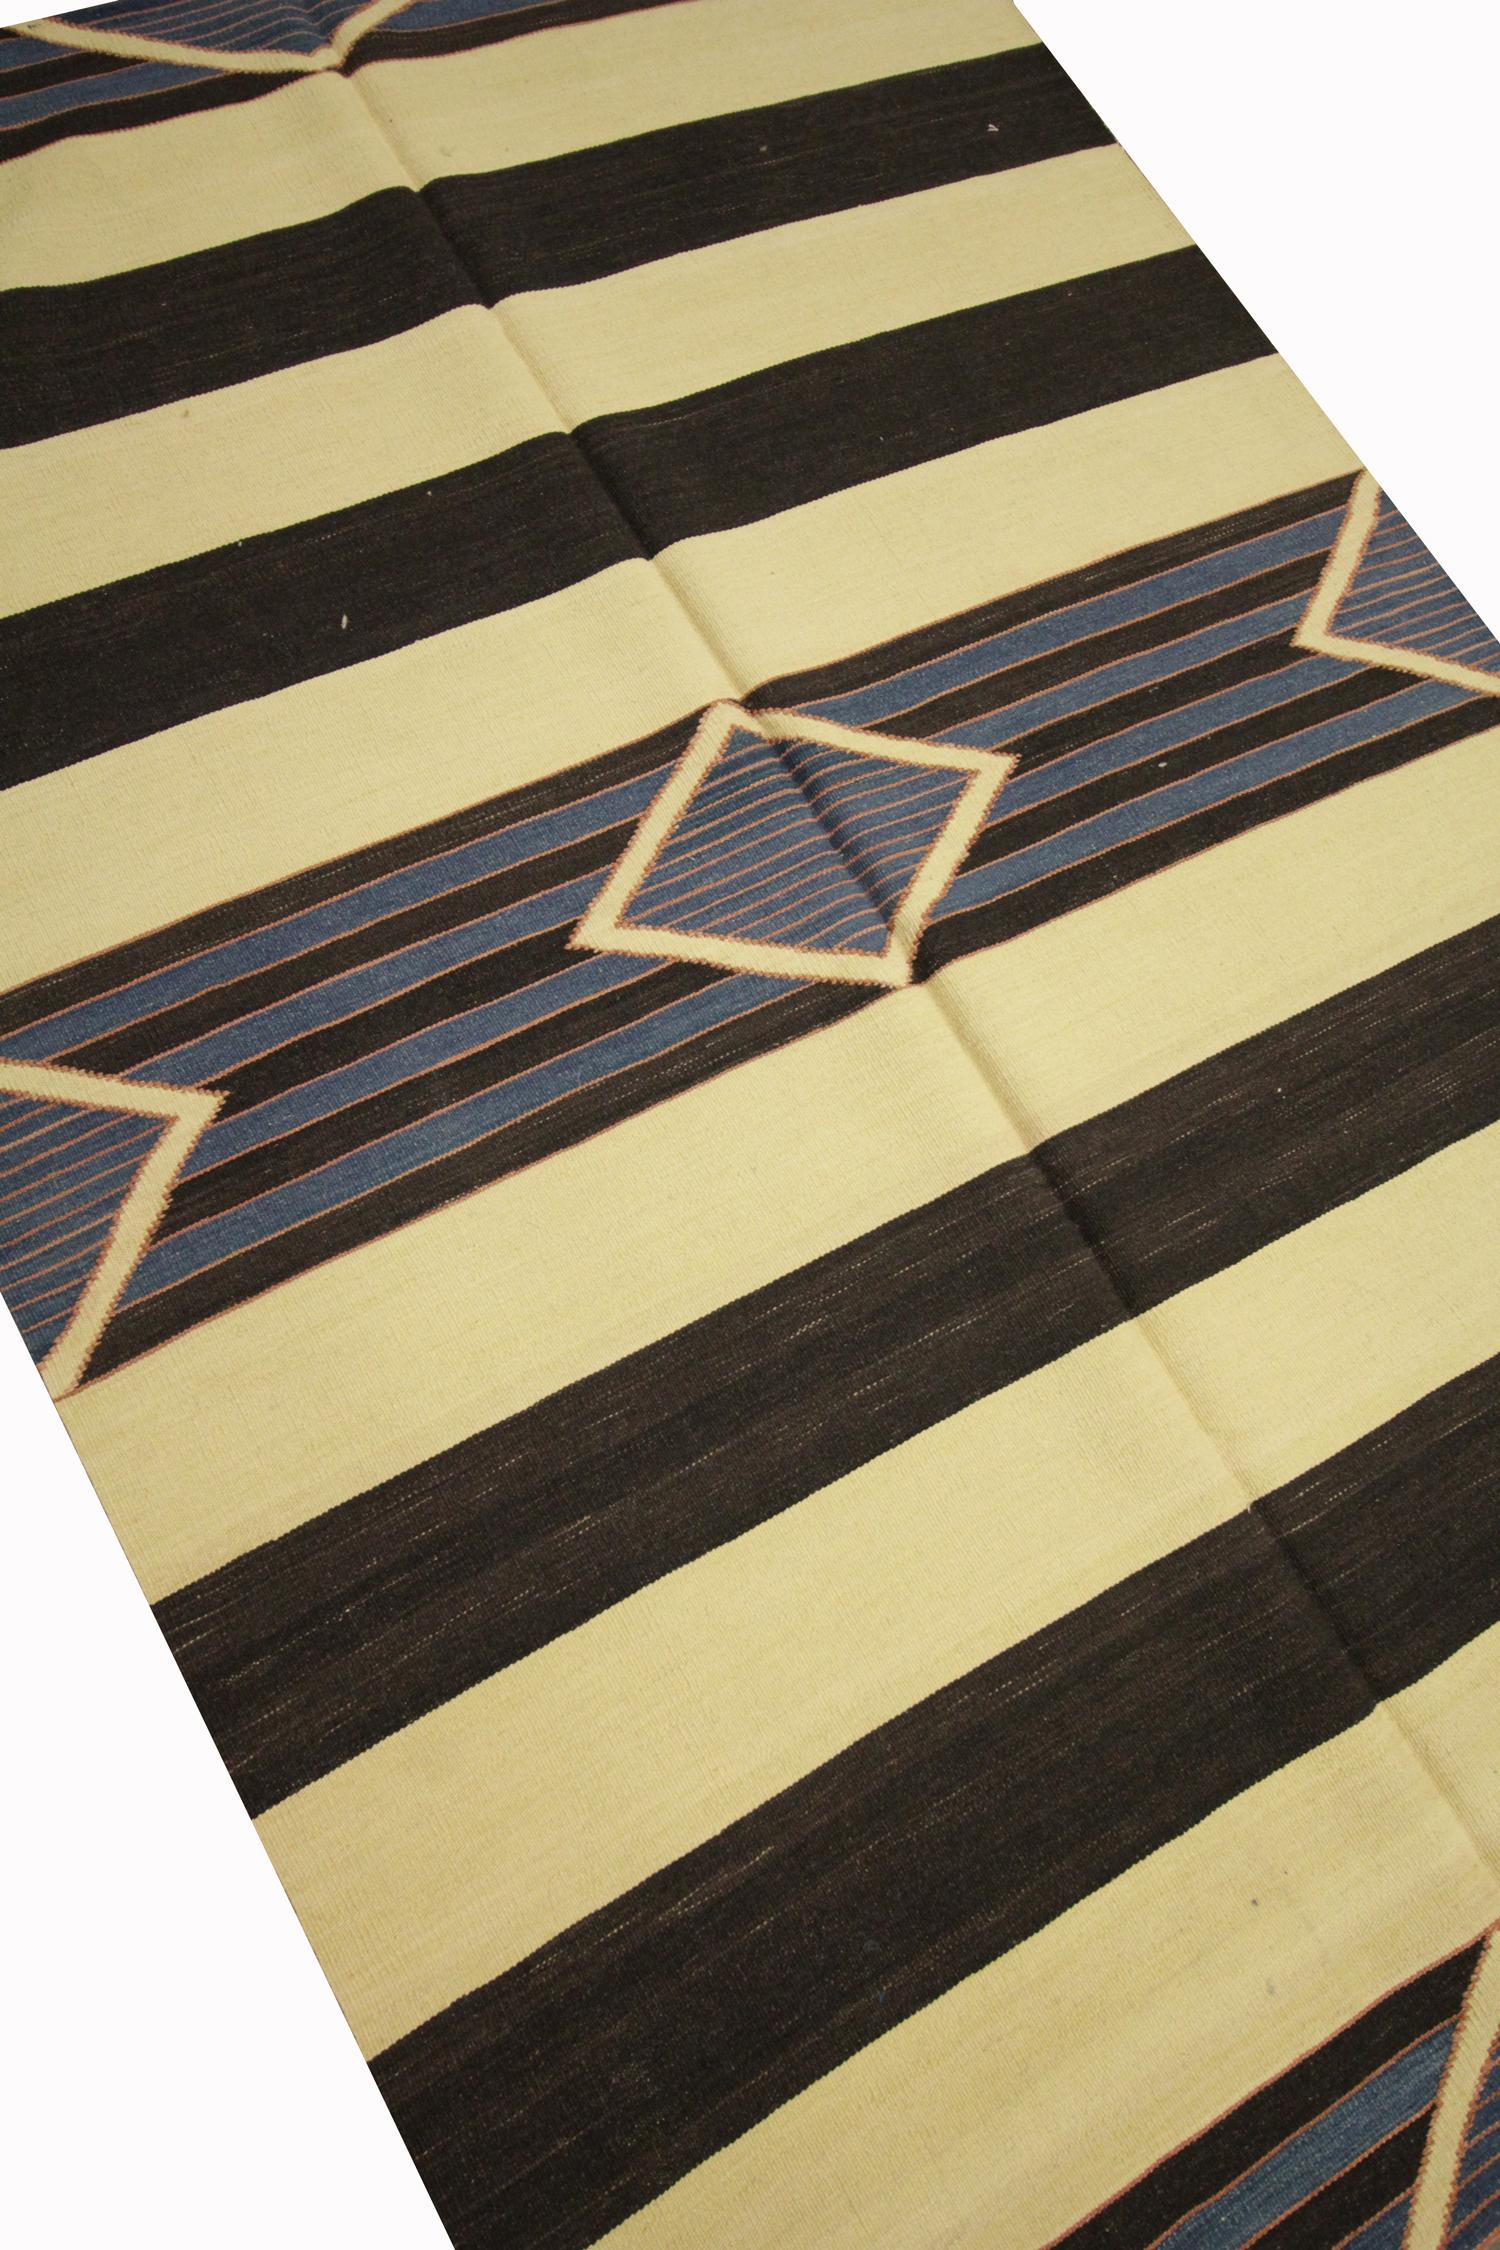 This Modern Rug is a fine wool Kilim woven by hand in India in the early 21st century. The design has been woven with a simple colour palette of cream, black and blue and features a stripe pattern with diamonds and triangles dotted and the centre